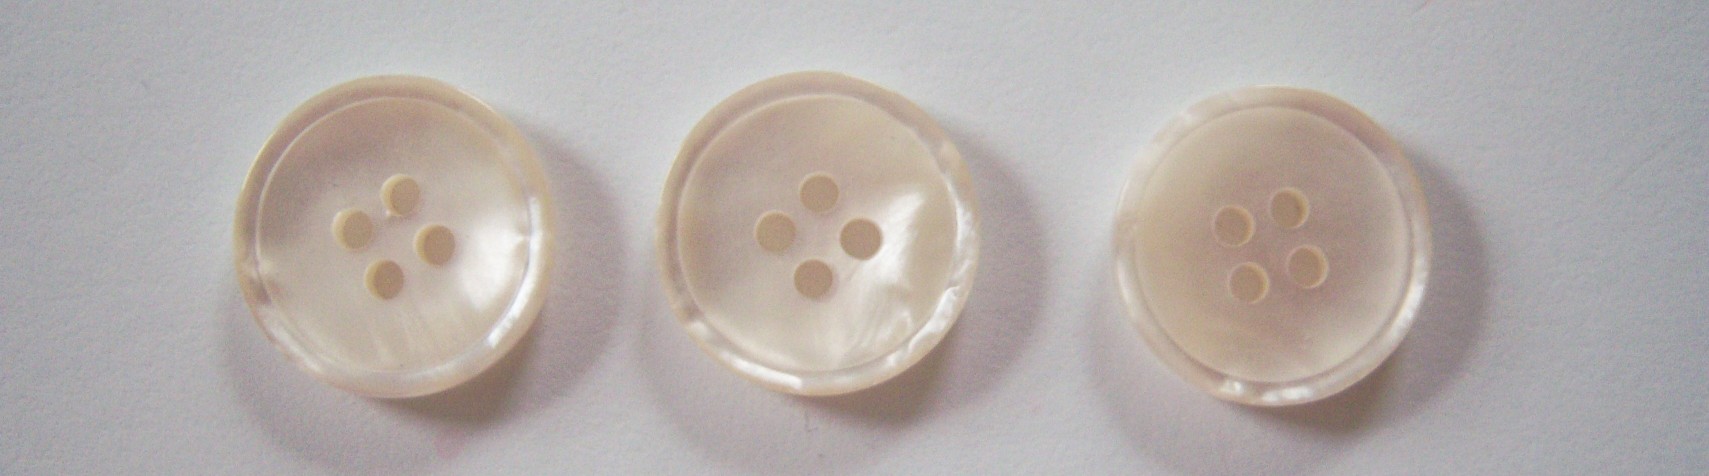 Ivory 3/4" Pearlized 4 Hole Button